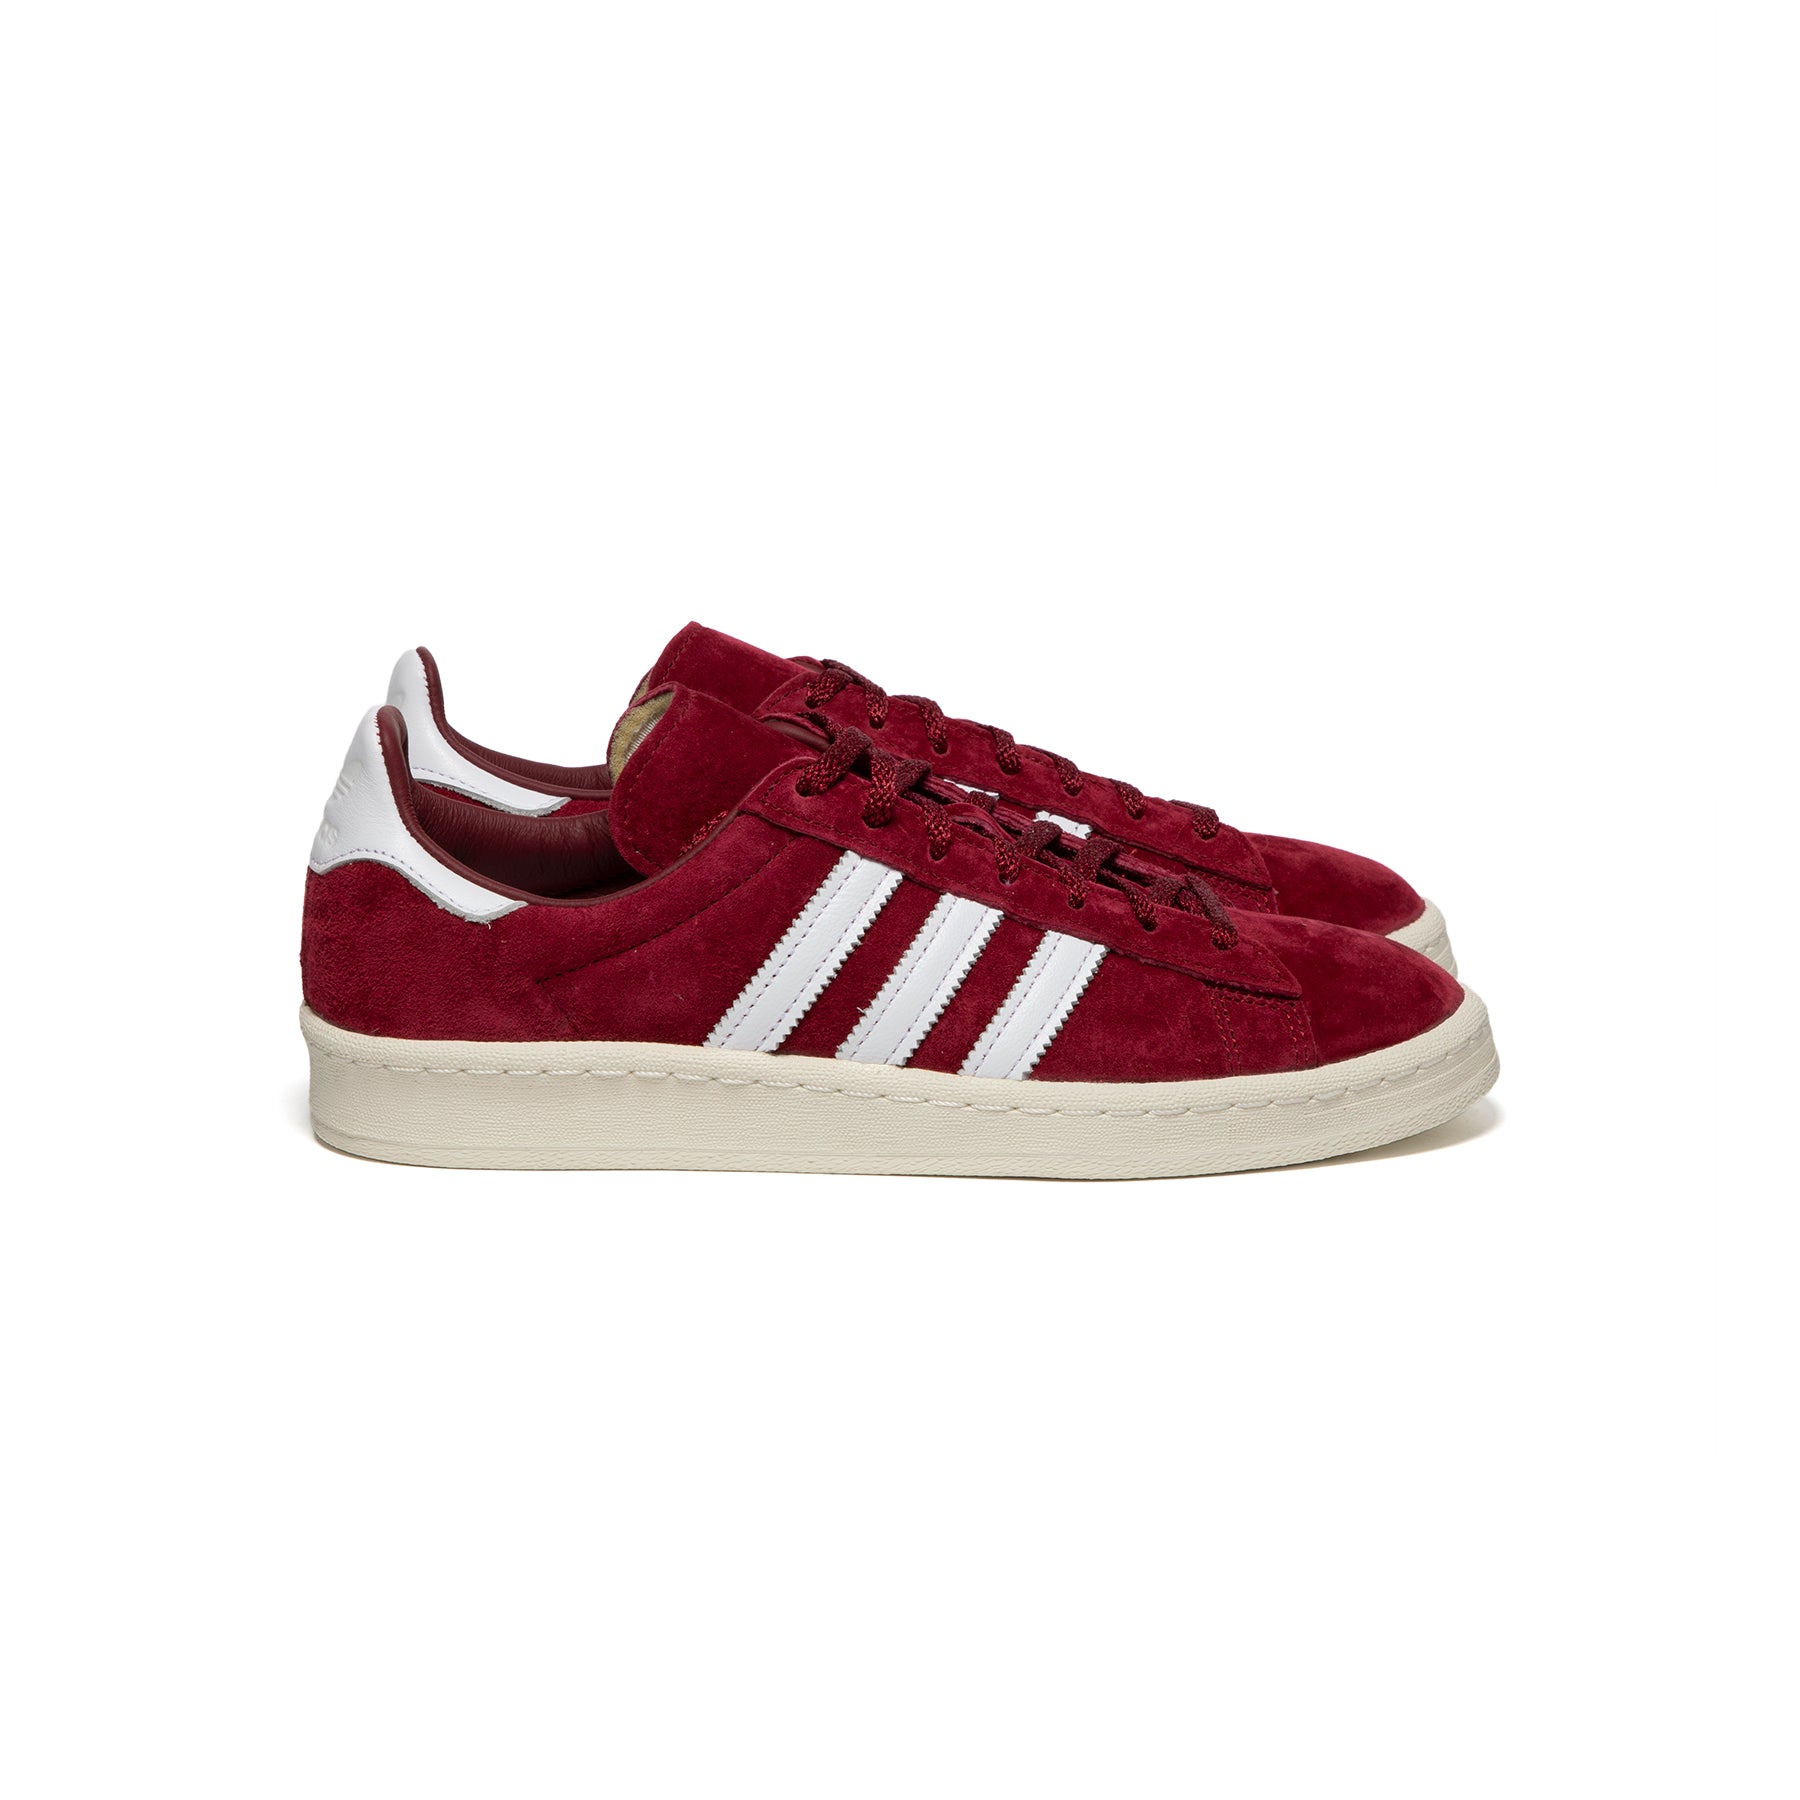 adidas Campus 80s Burgundy/Cloud White/Off – Concepts